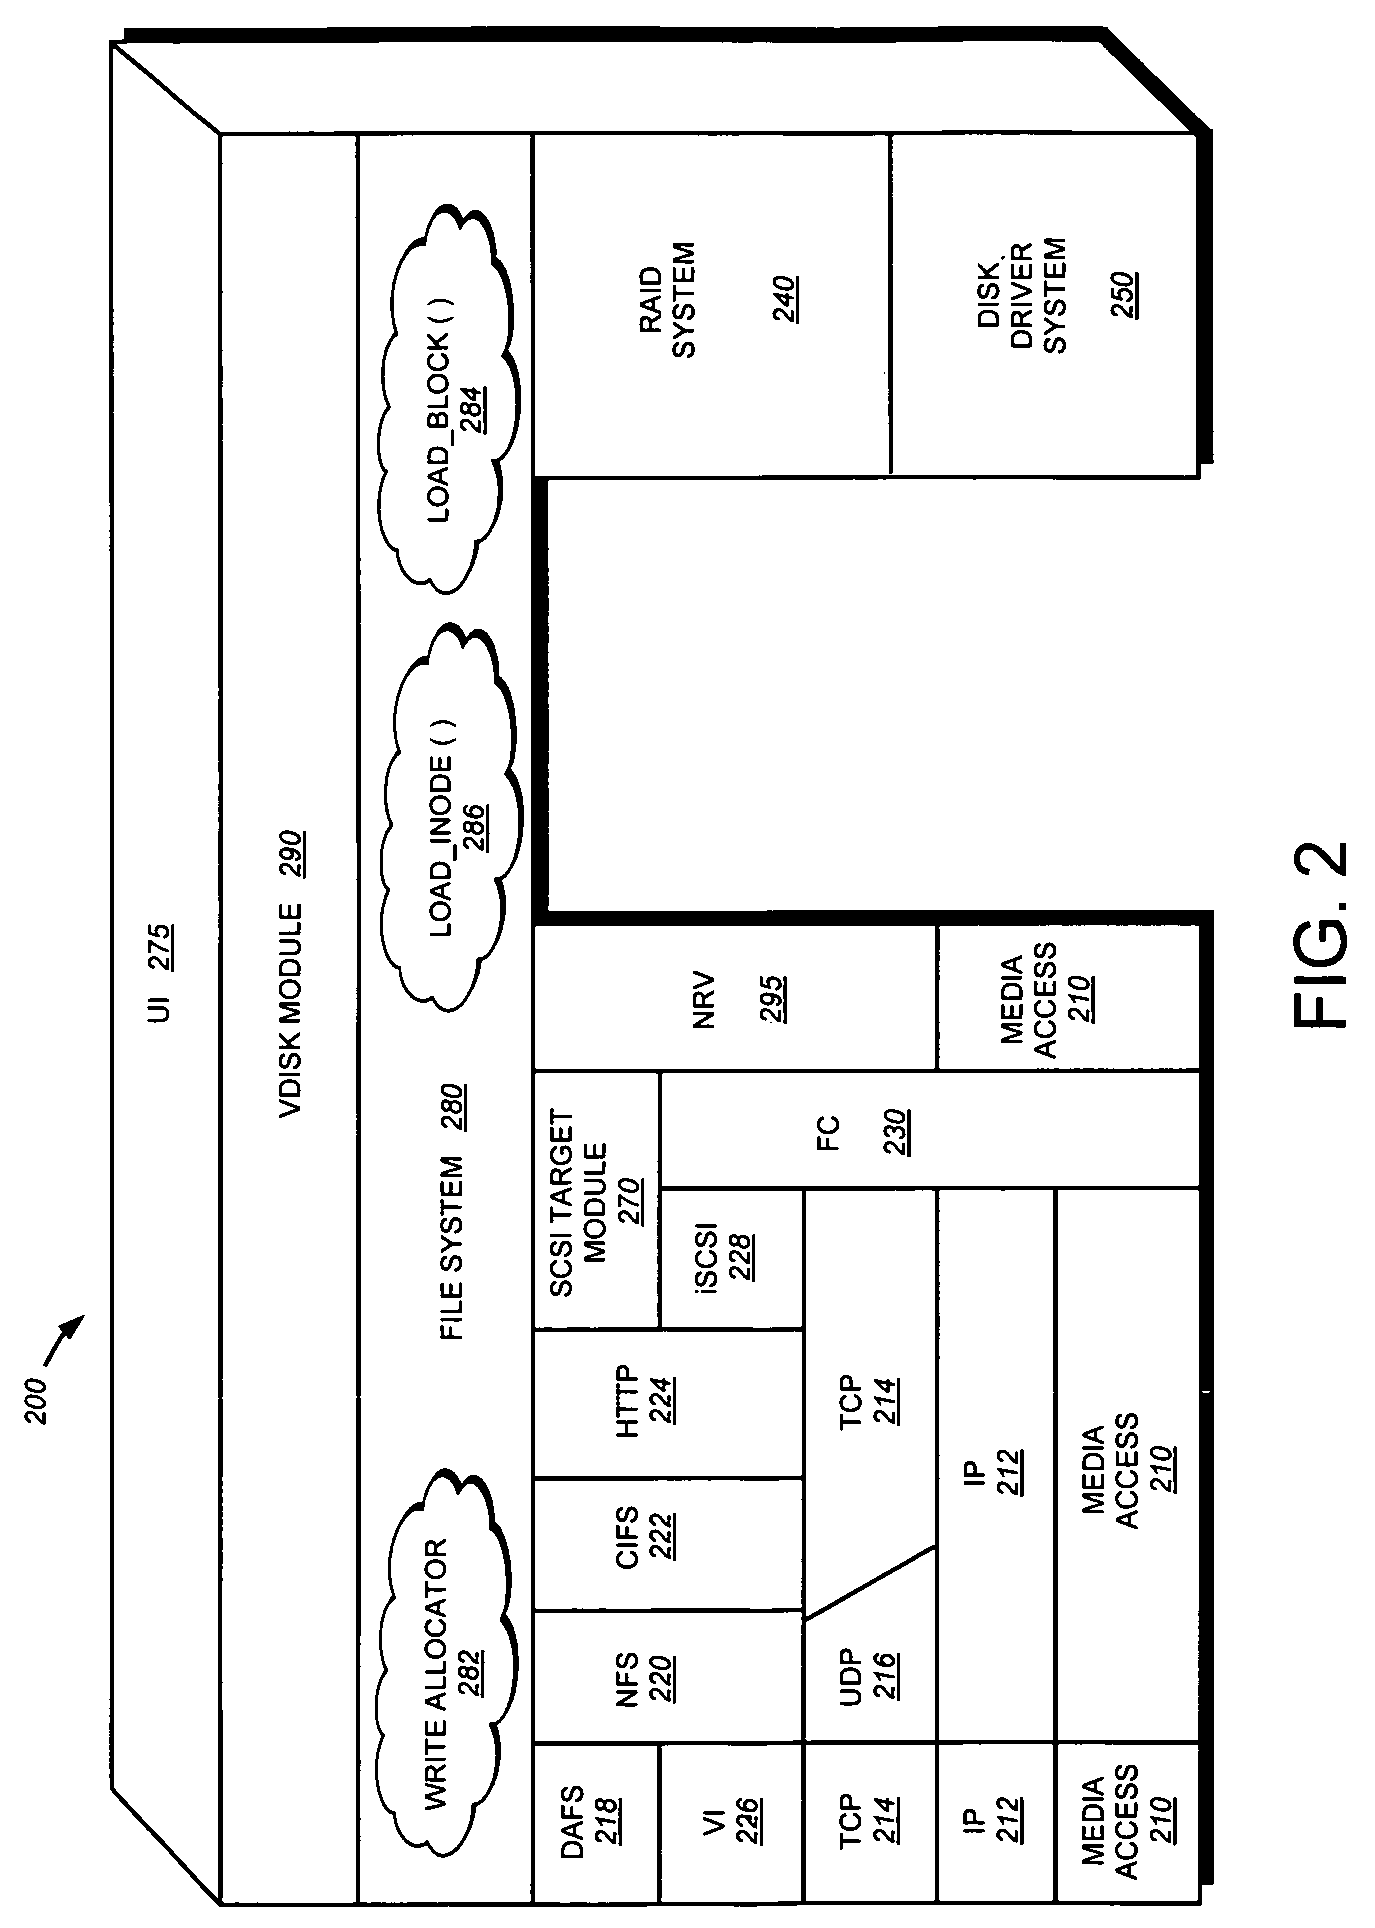 Architecture for supporting sparse volumes